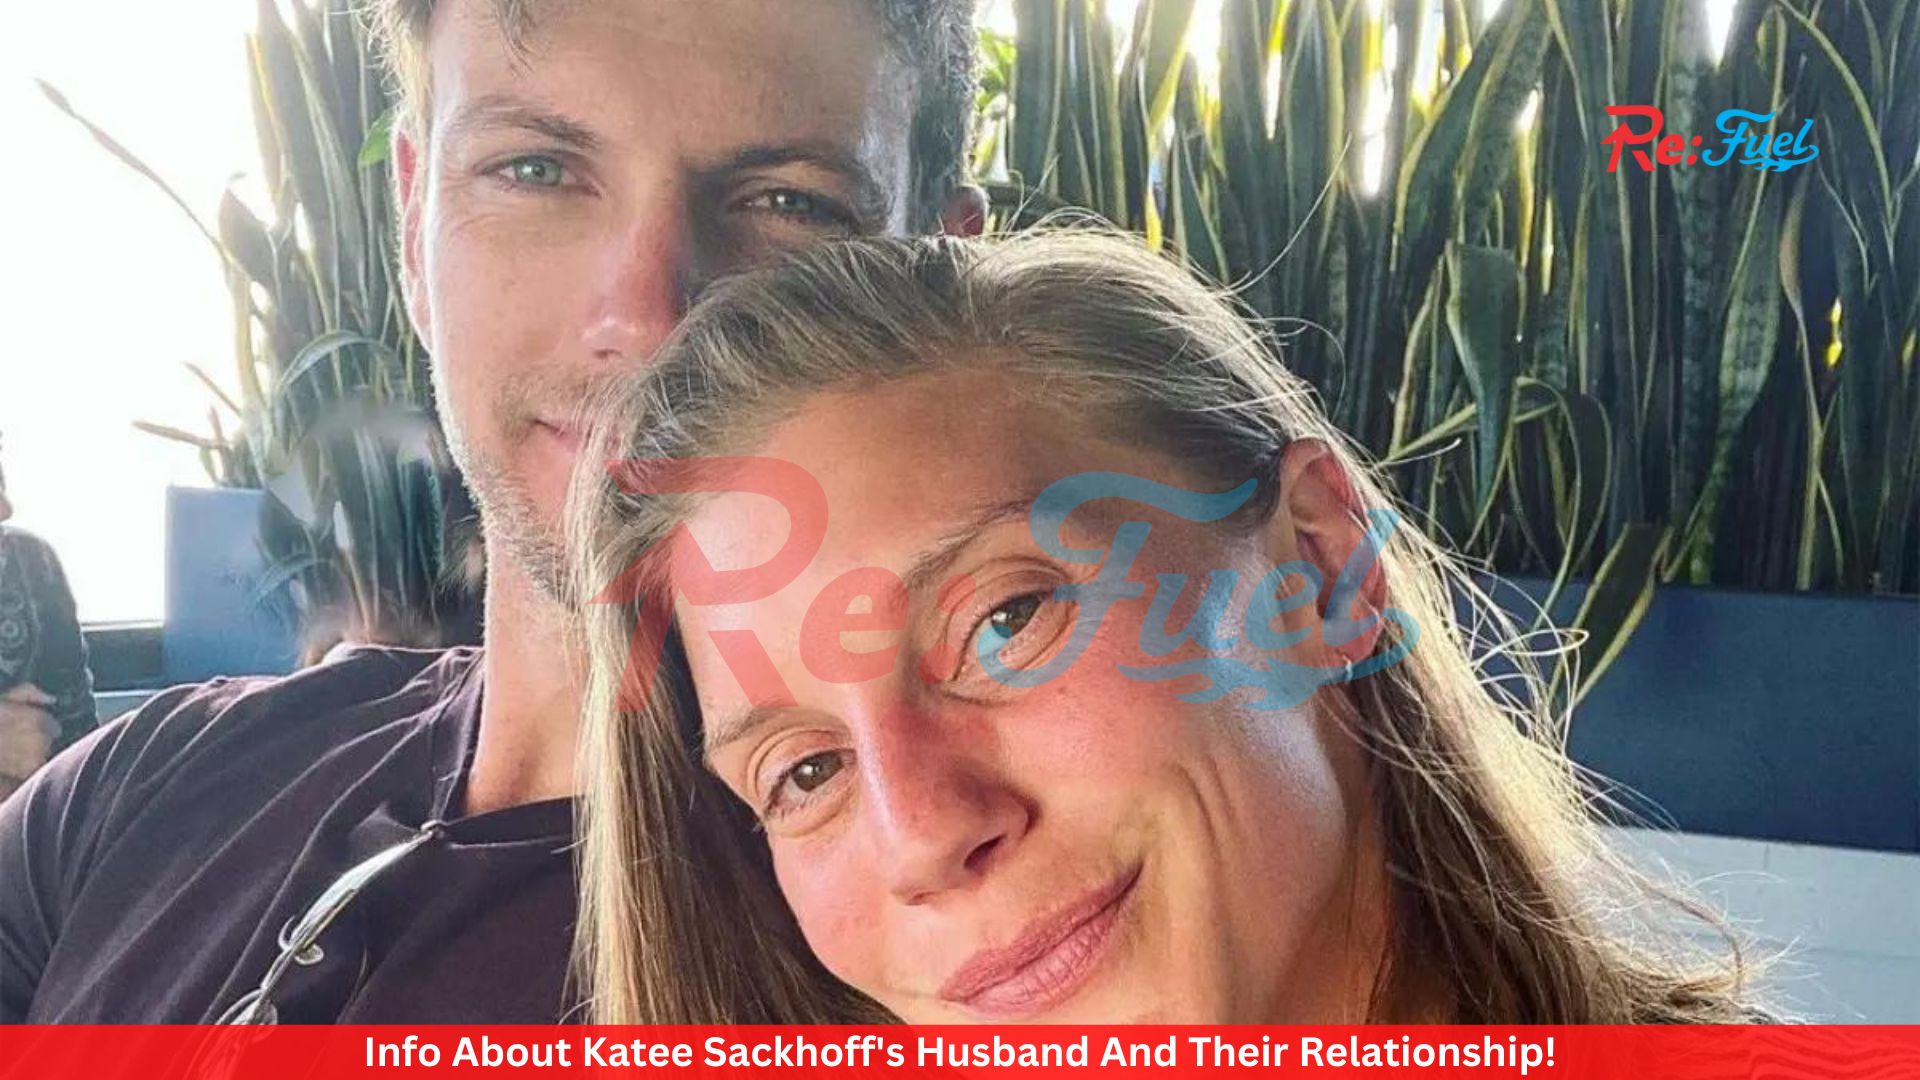 Info About Katee Sackhoff's Husband And Their Relationship!